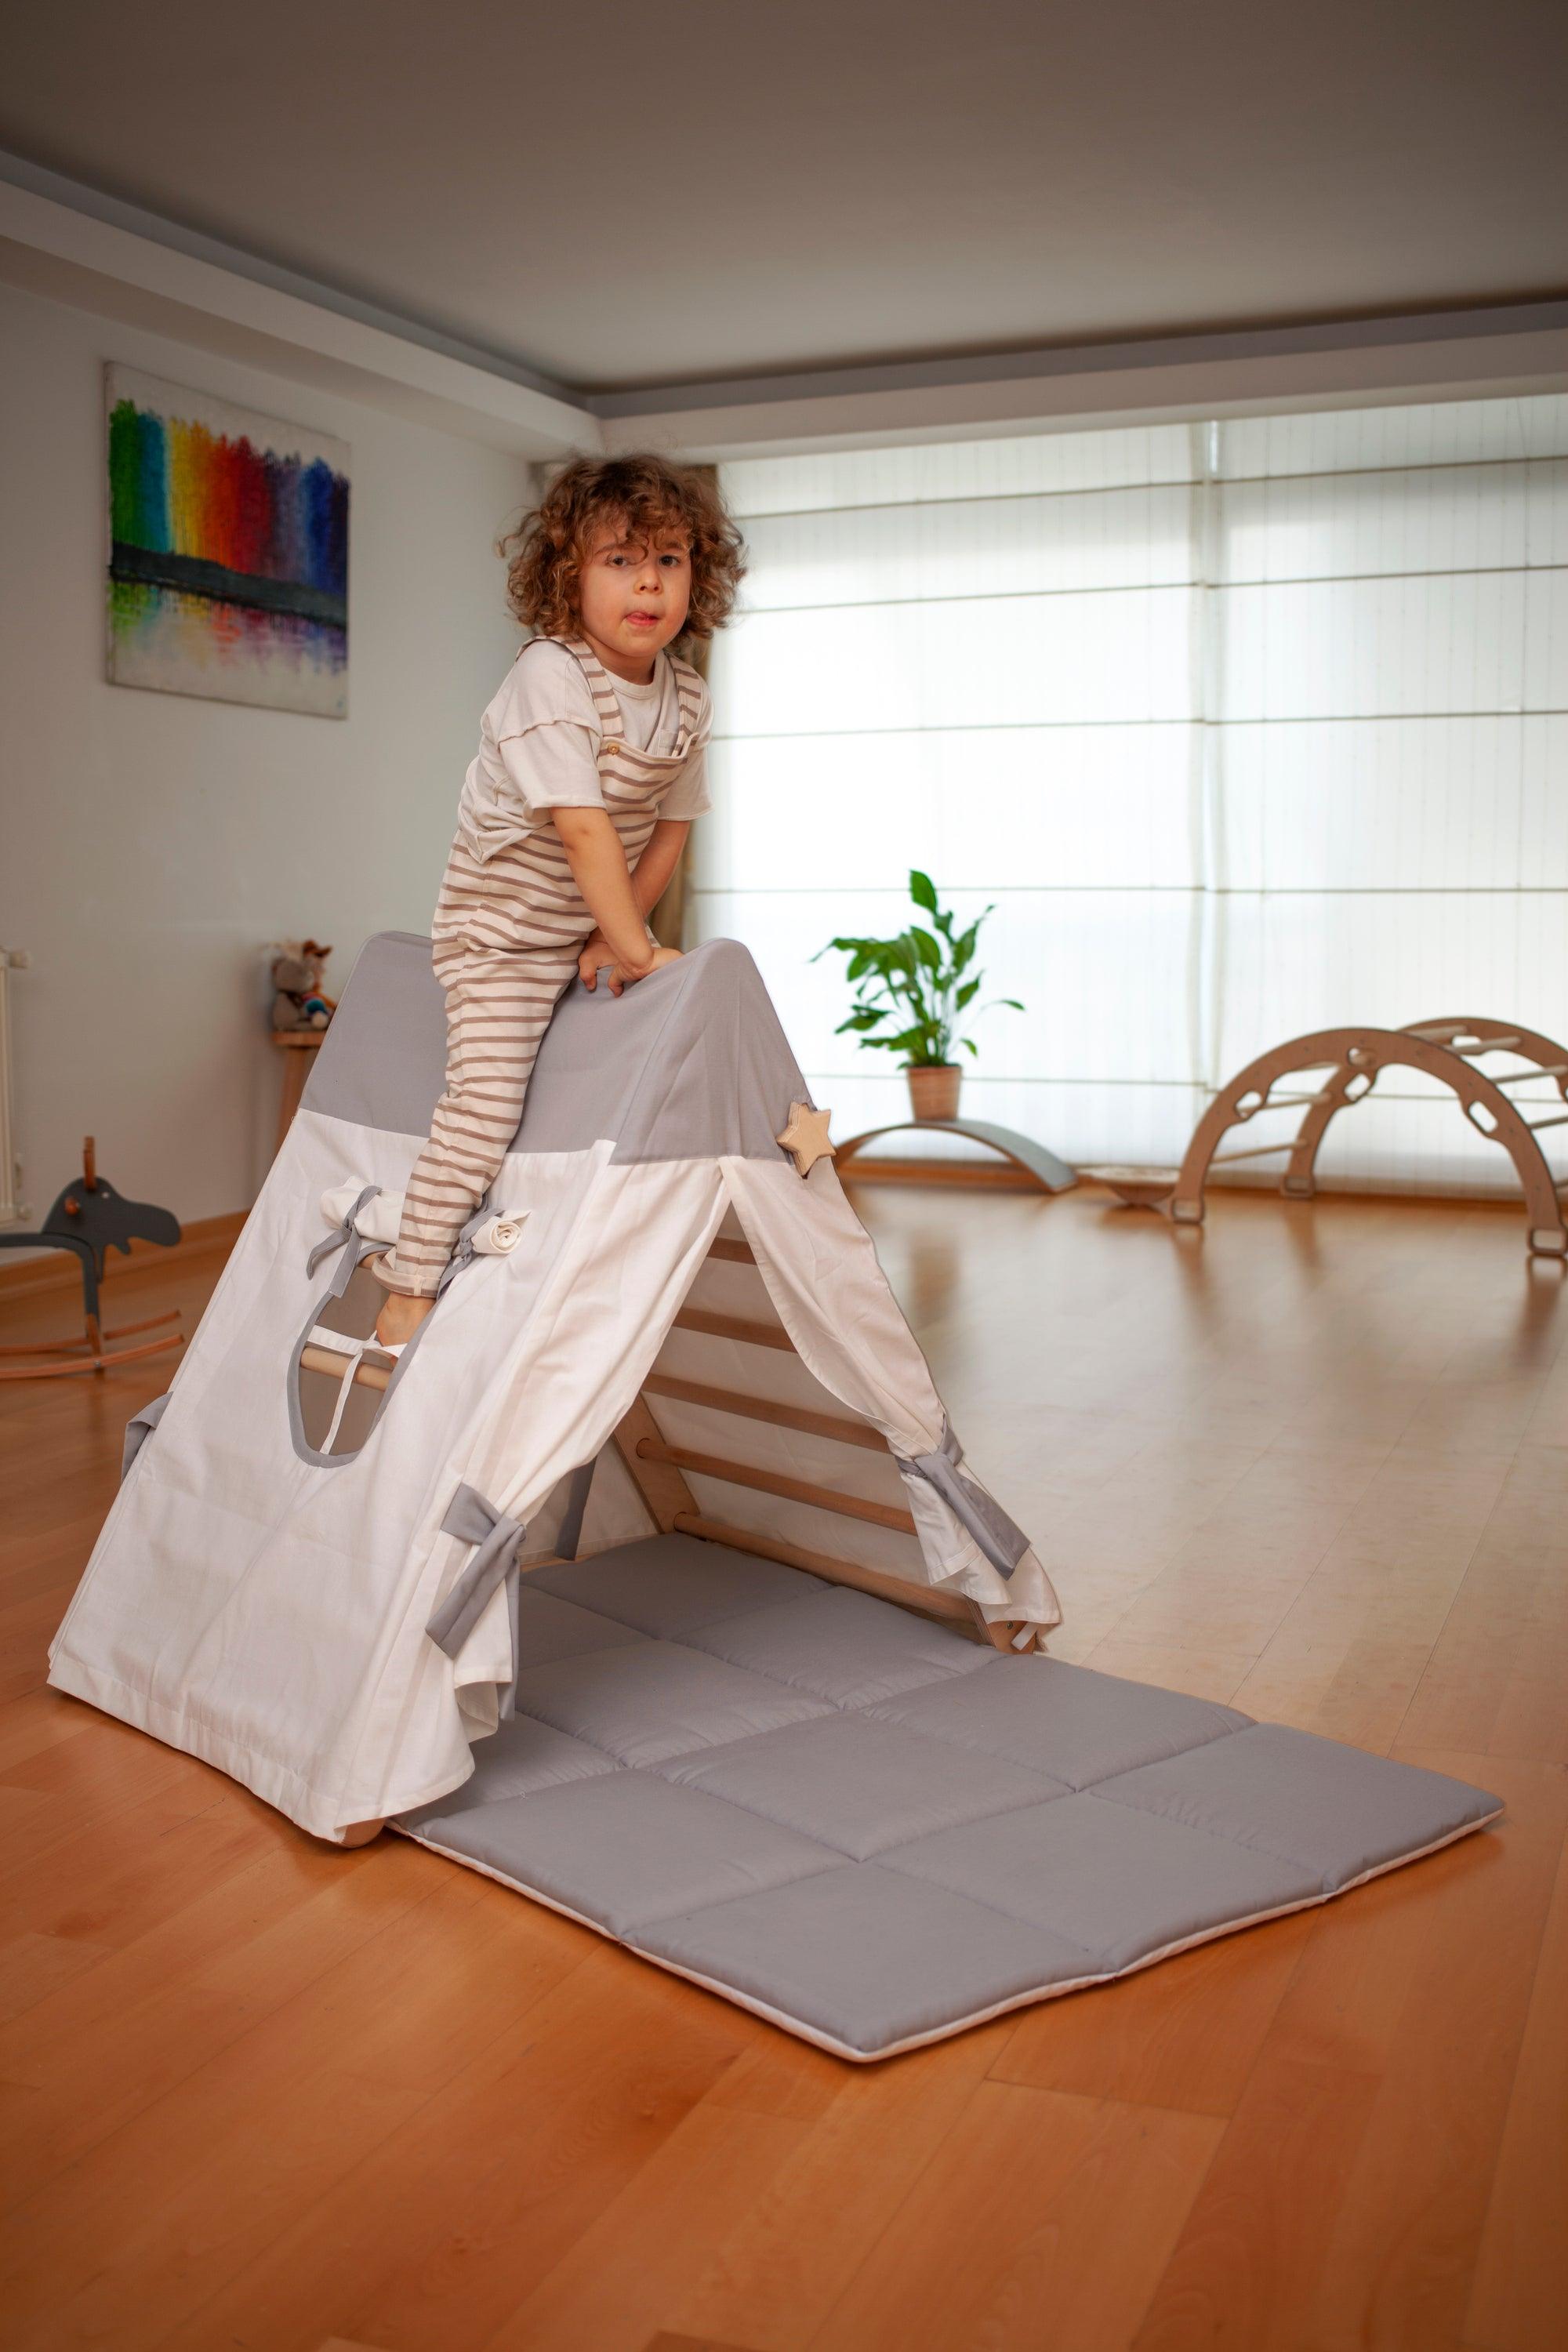 Climbing Triangle with Tent Cover, Mat, Ramp - Learning Through Play